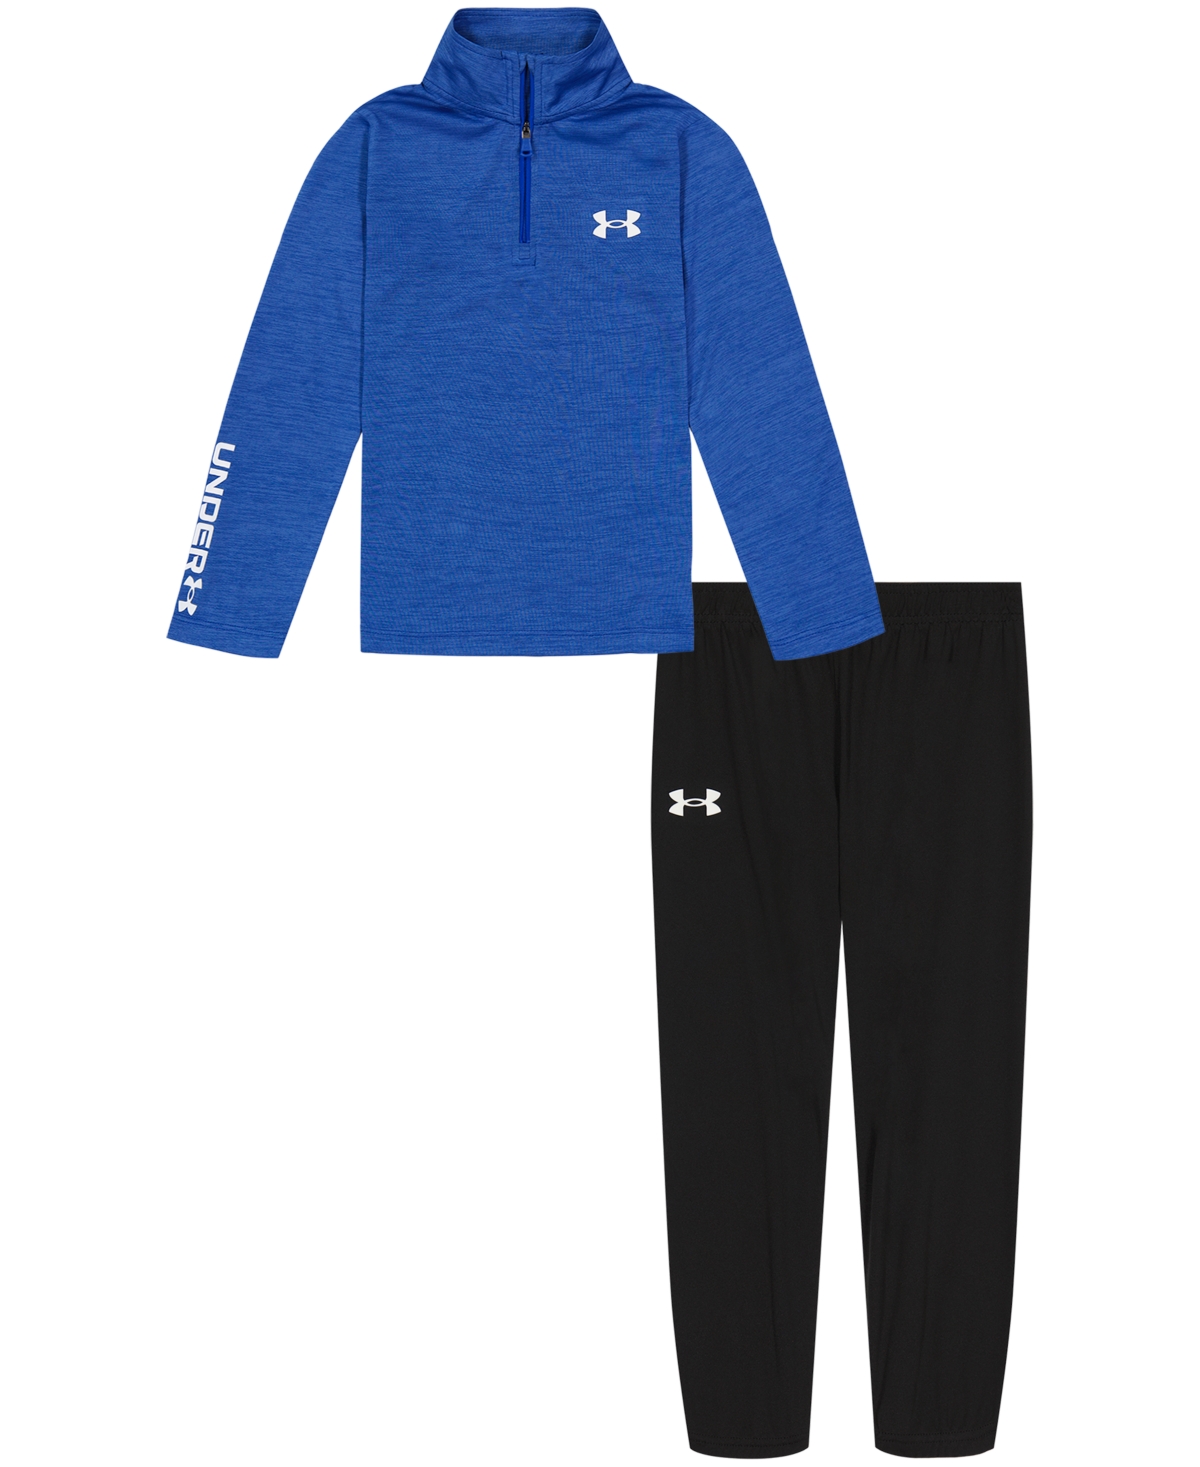 UNDER ARMOUR TODDLER BOYS BRANDED QUARTER ZIP TWIST TOP AND JOGGERS SET